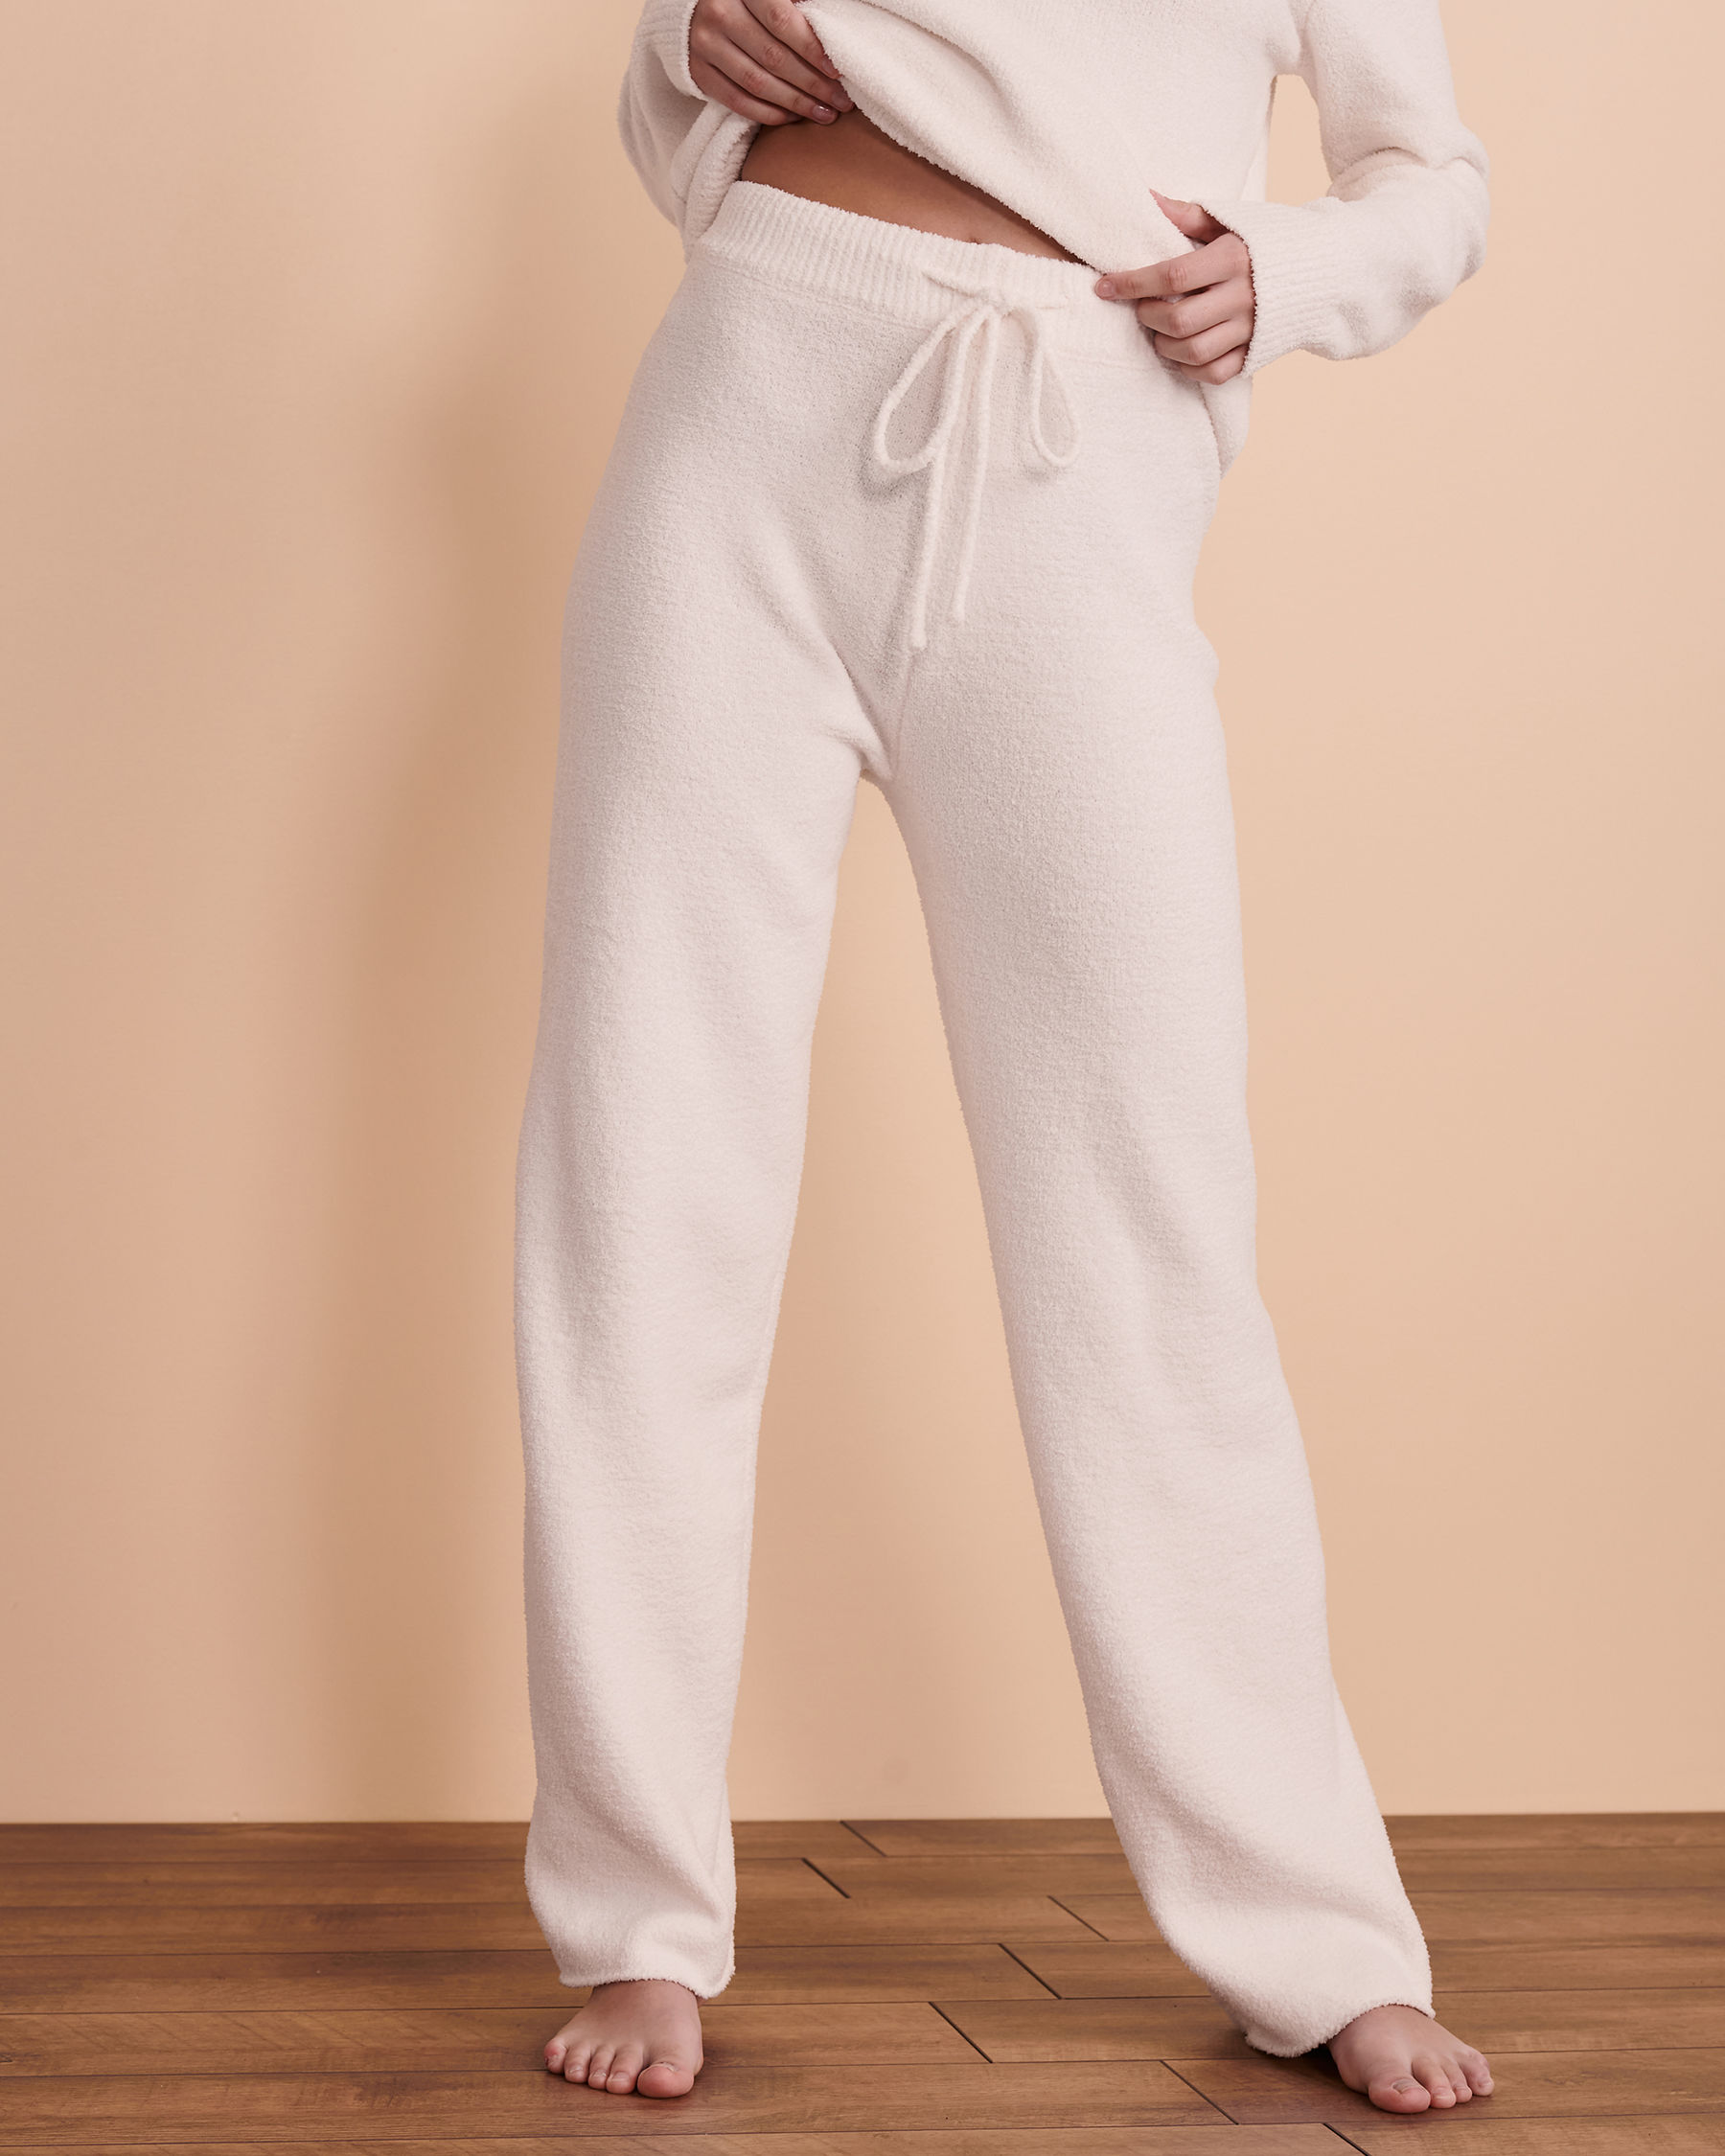 TURQUOISE COUTURE Chenille Lounge Pant White-beige 02200015 - View1